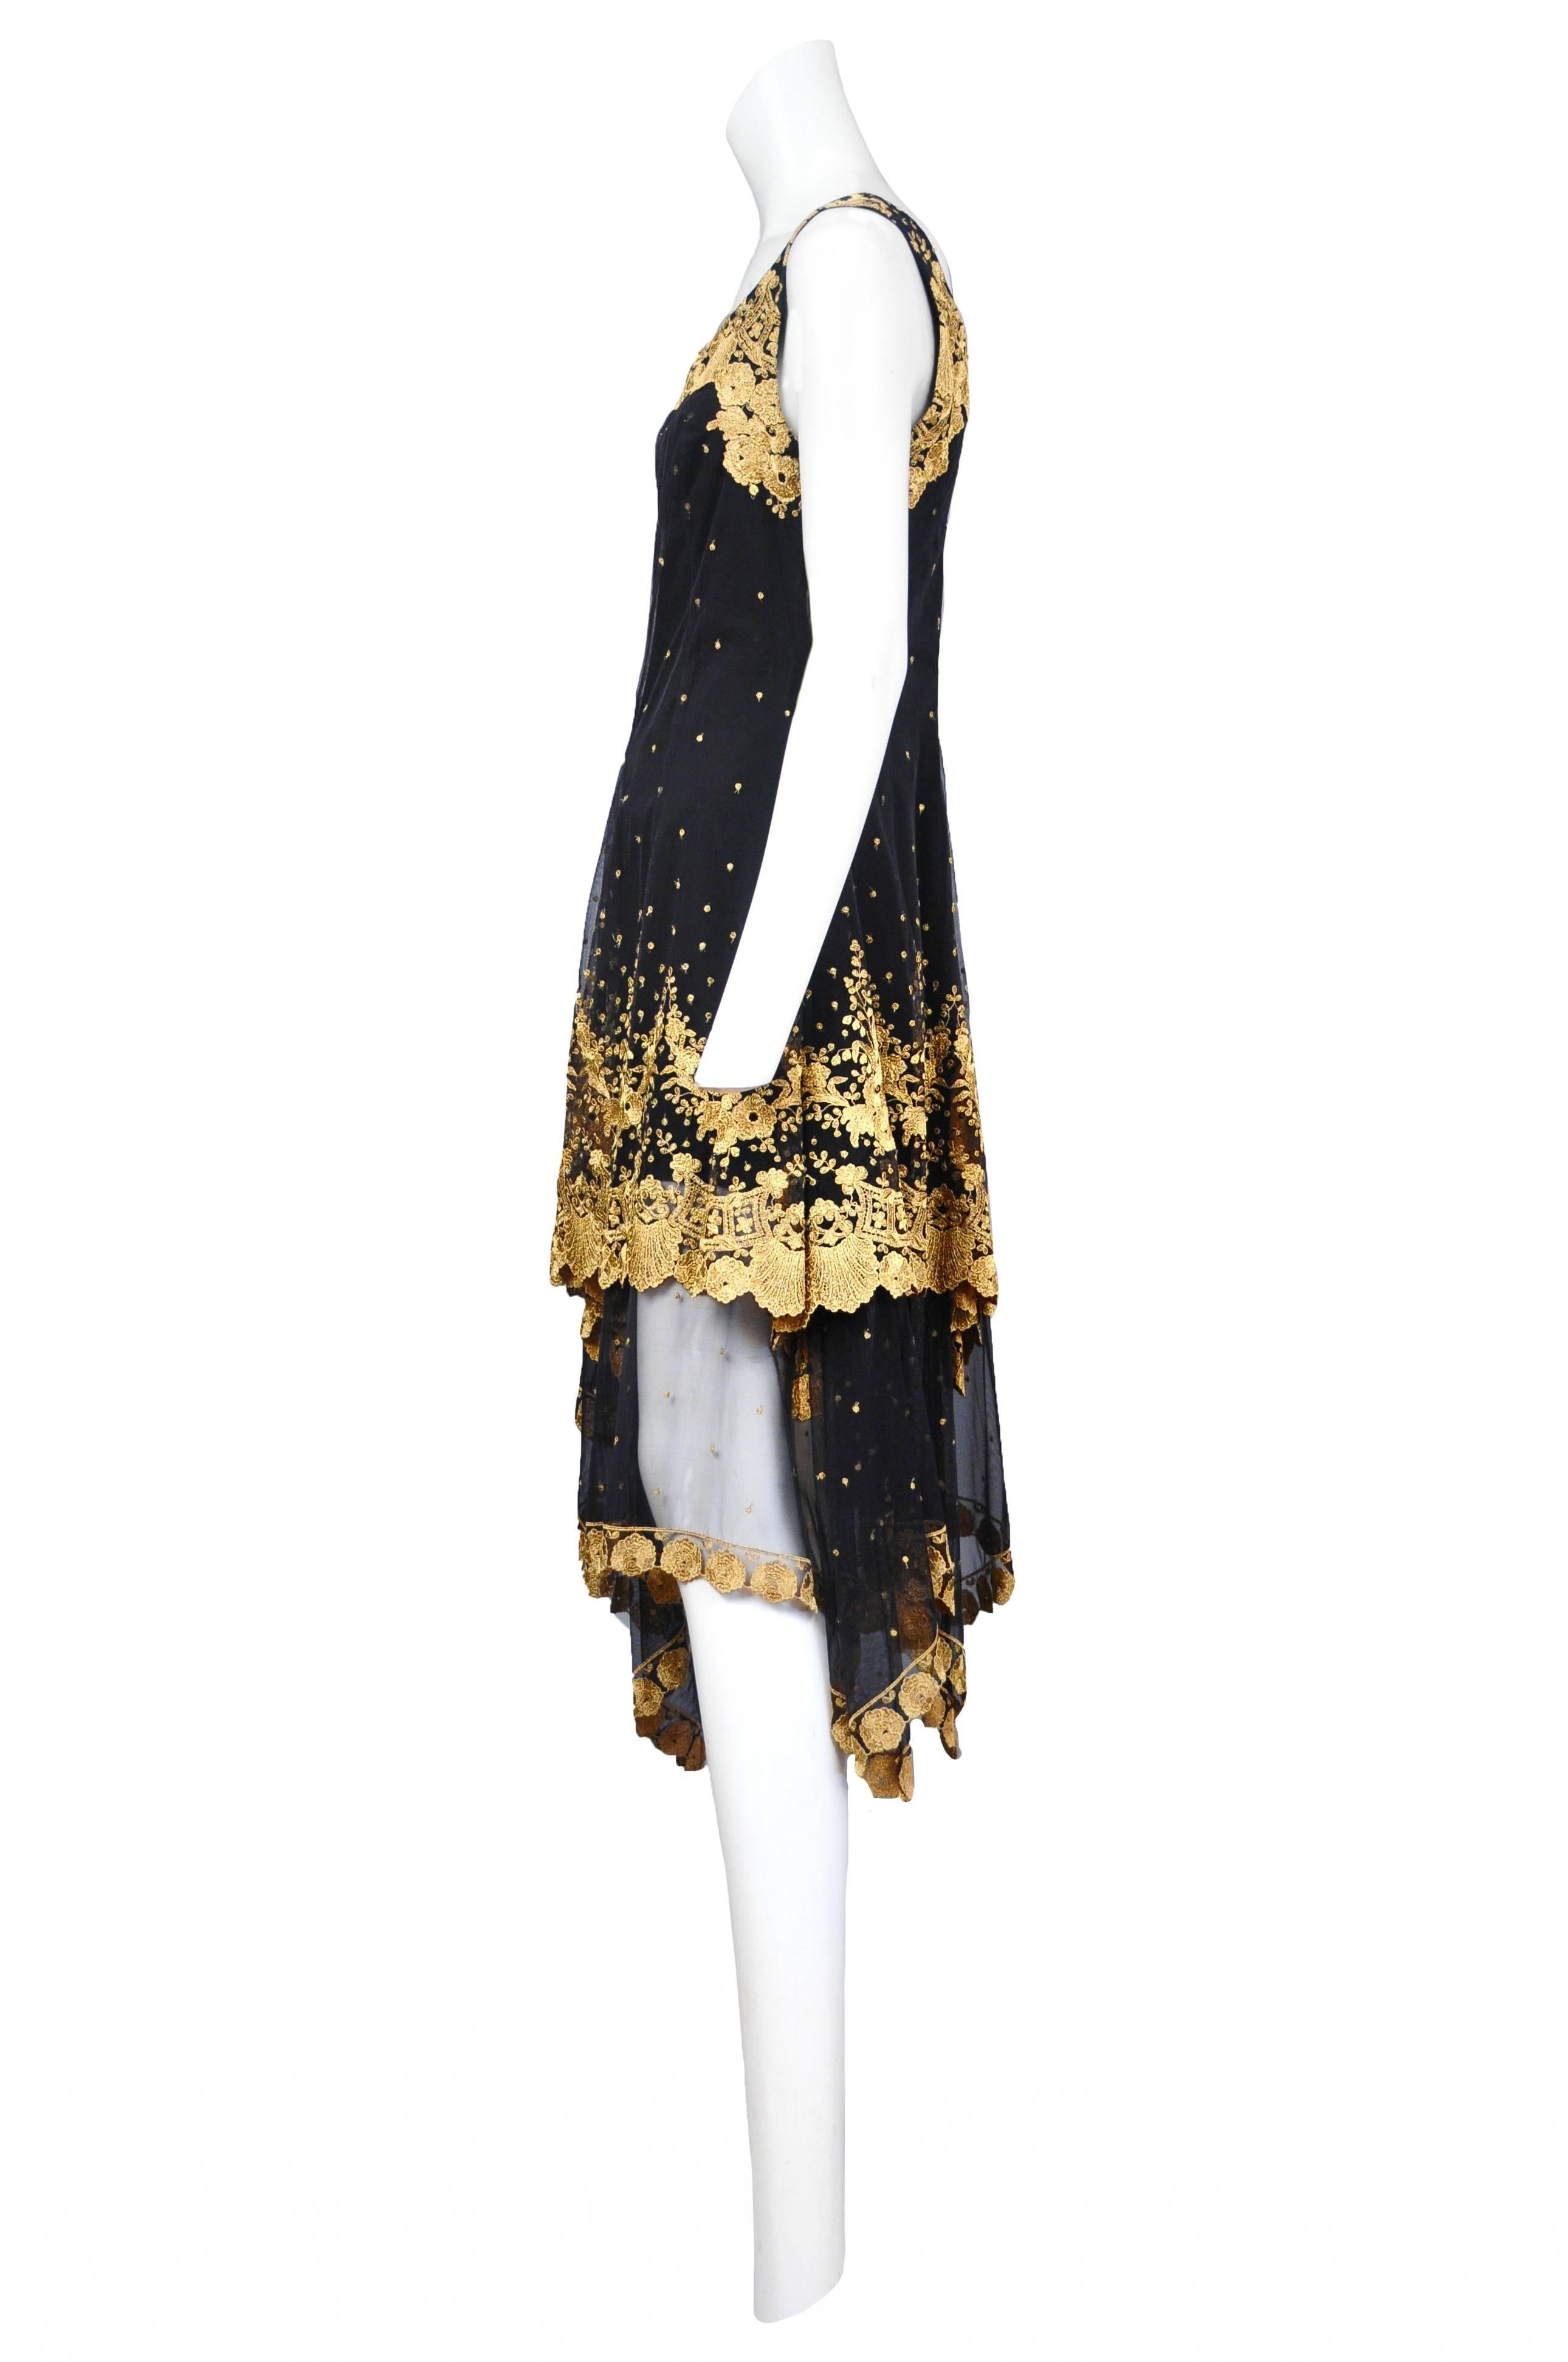 Vintage Christian Lacroix black sleeveless gown featuring gold embroidery throughout and a second sheer black tier at the hem, also adorned with gold embroidery.